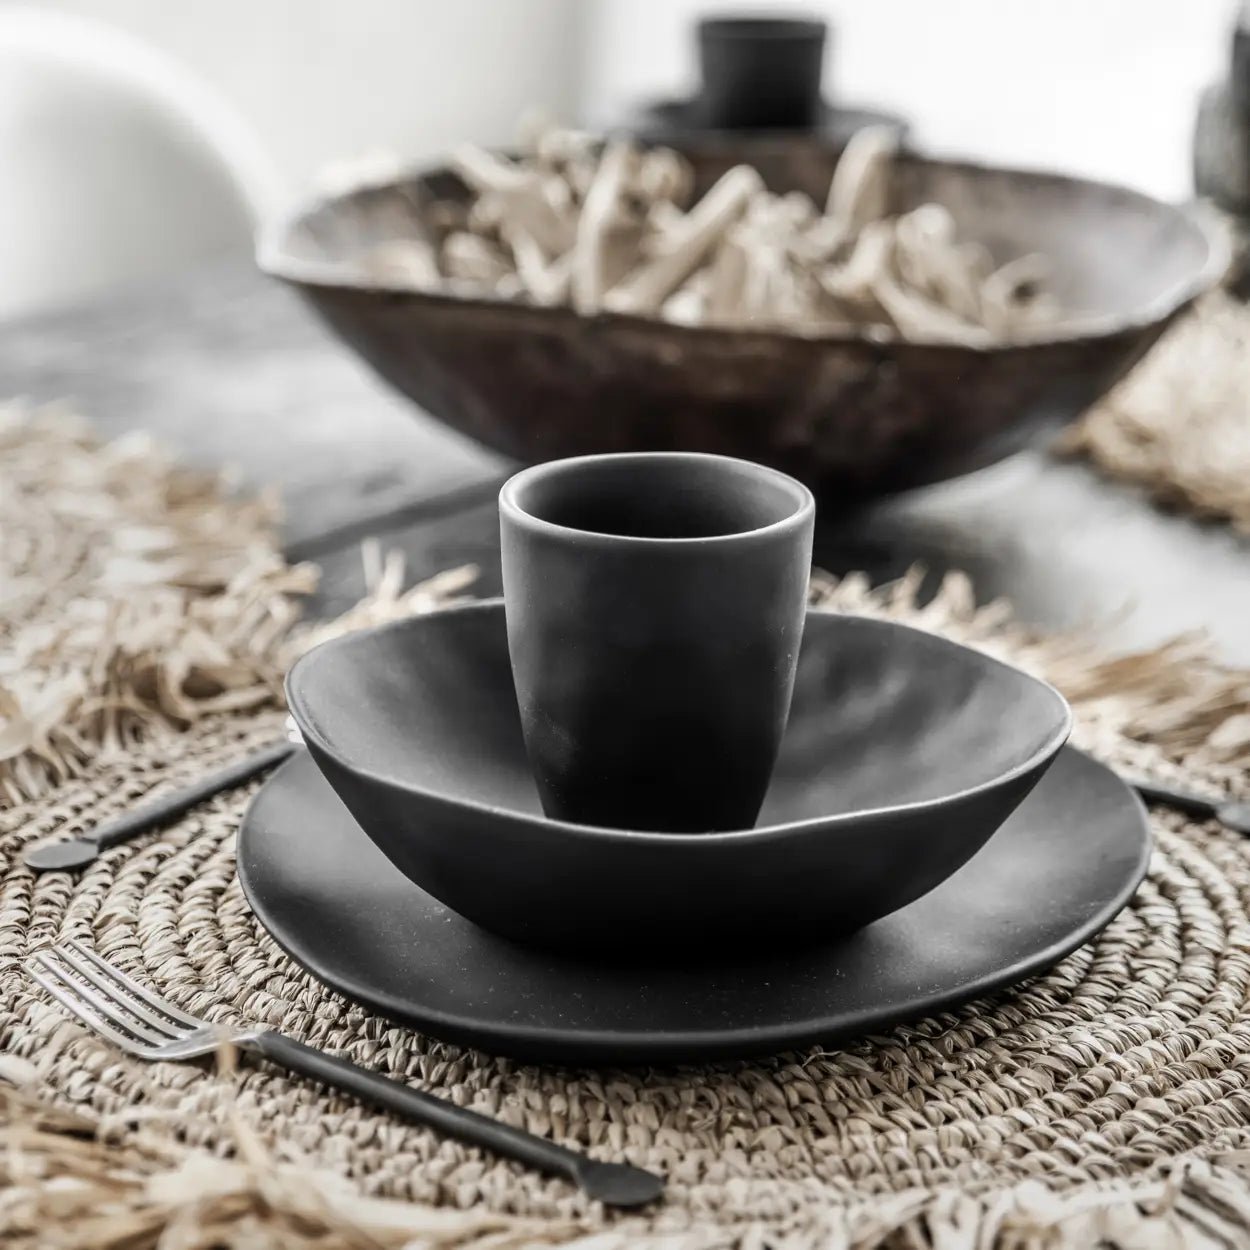 ‘The Fringe’ Raffia Placemat, Round (Natural) - EcoLuxe Furnishings